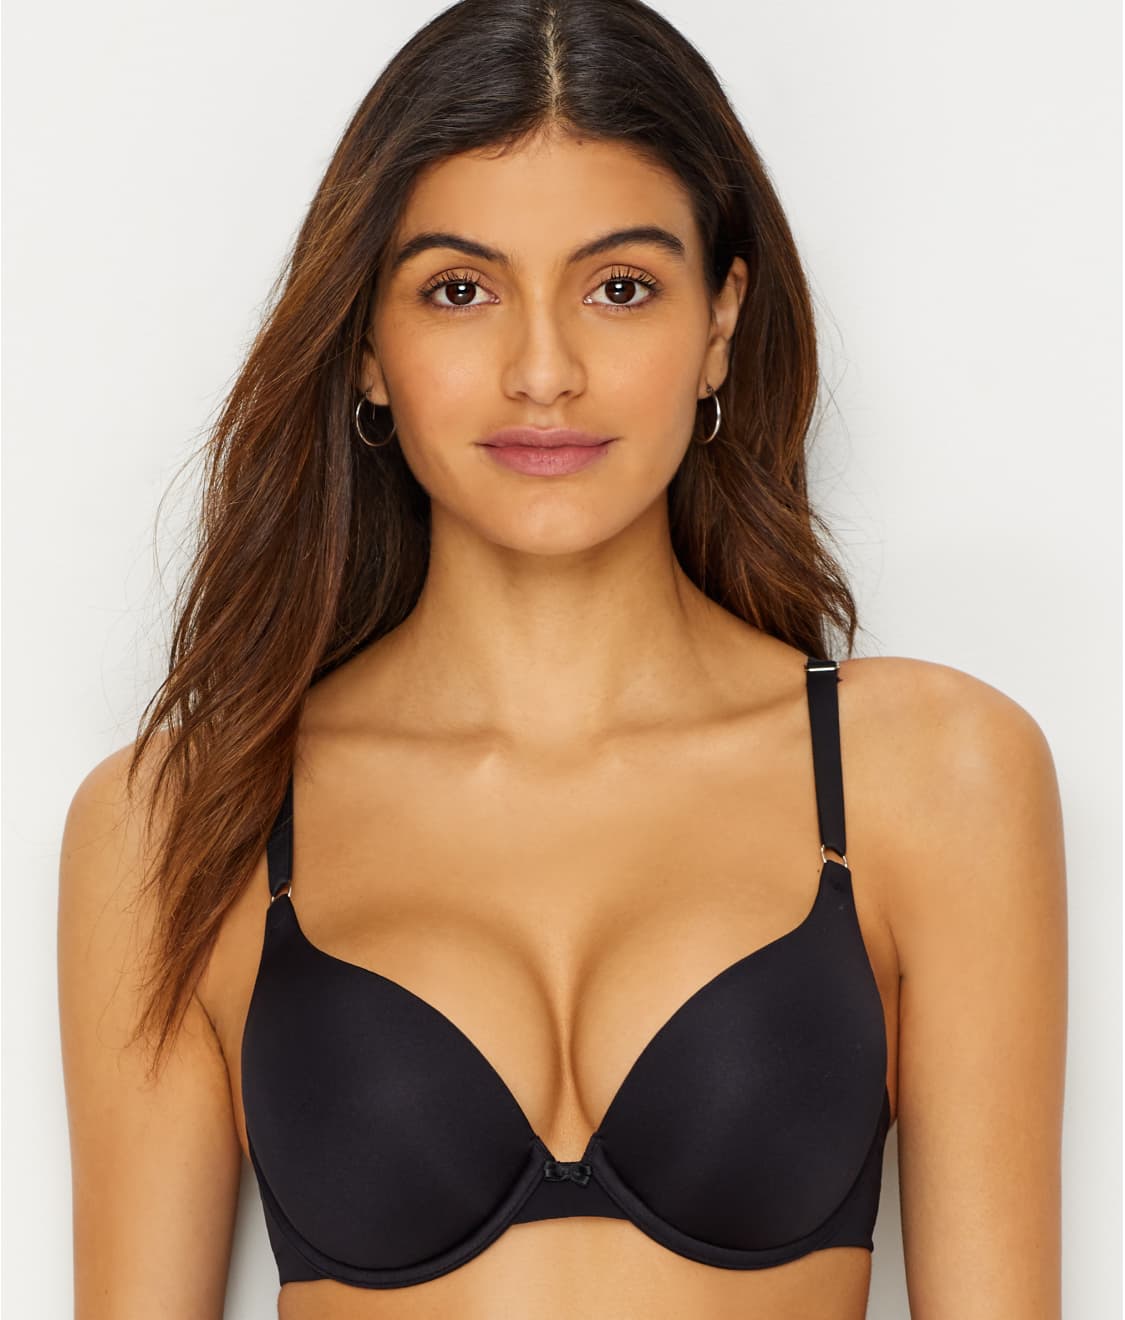 Lily Of France Push Up Bras in Womens Bras 